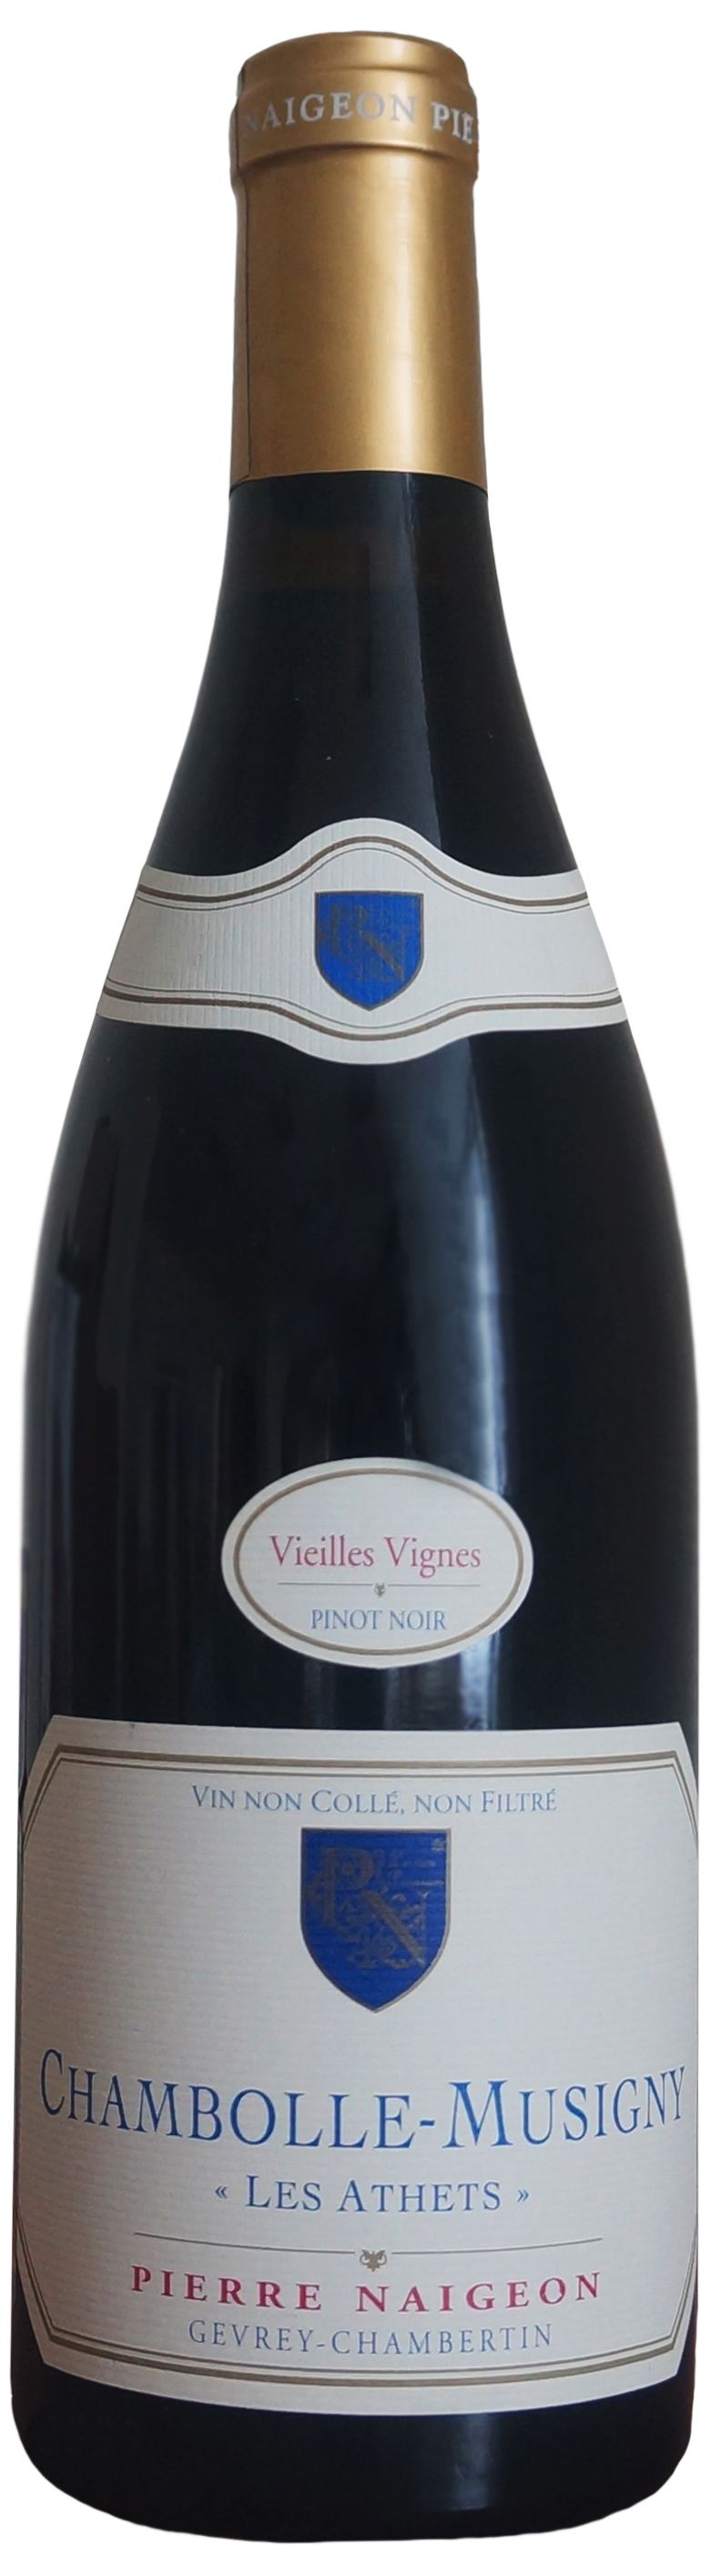 Pierre Naigeon, Chambolle-Musigny Les Athets Vieilles Vignes, 2012